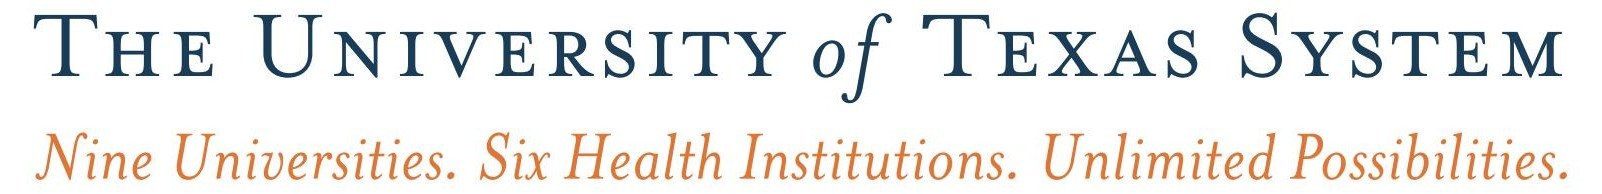 University of Texas System Logo png